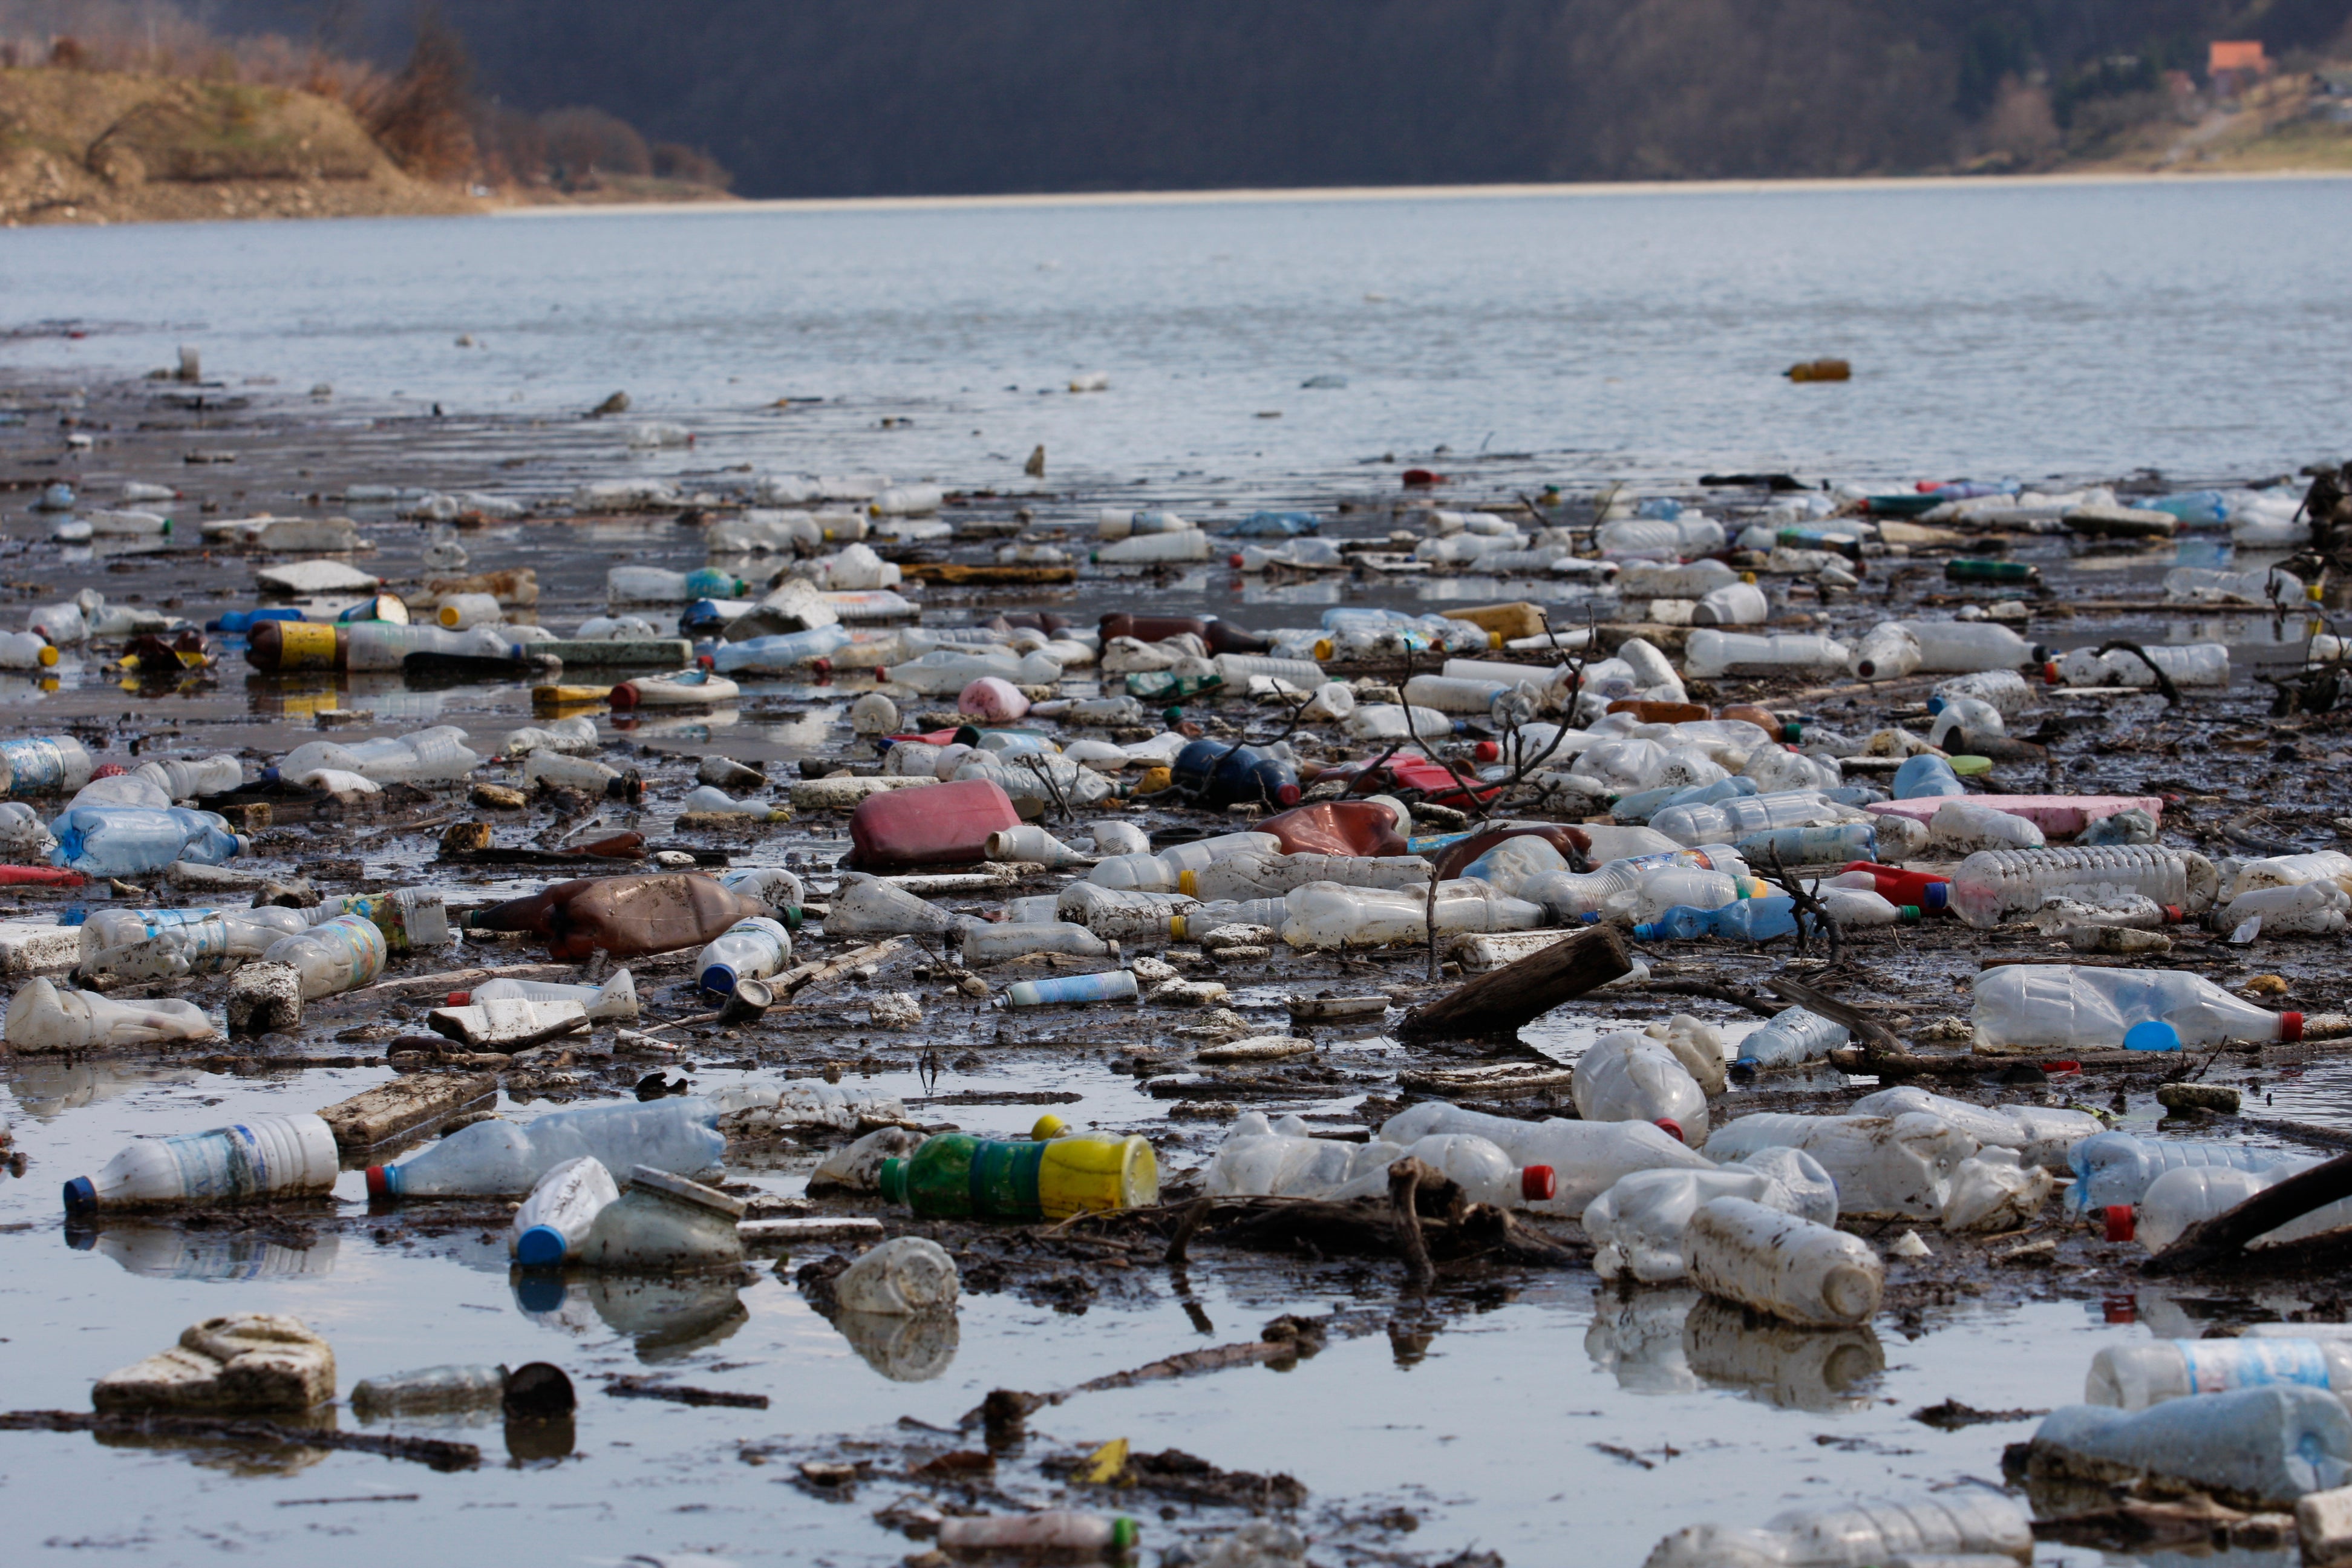 ‘The further plastic goes from where it comes from, the harder it is to clear up’